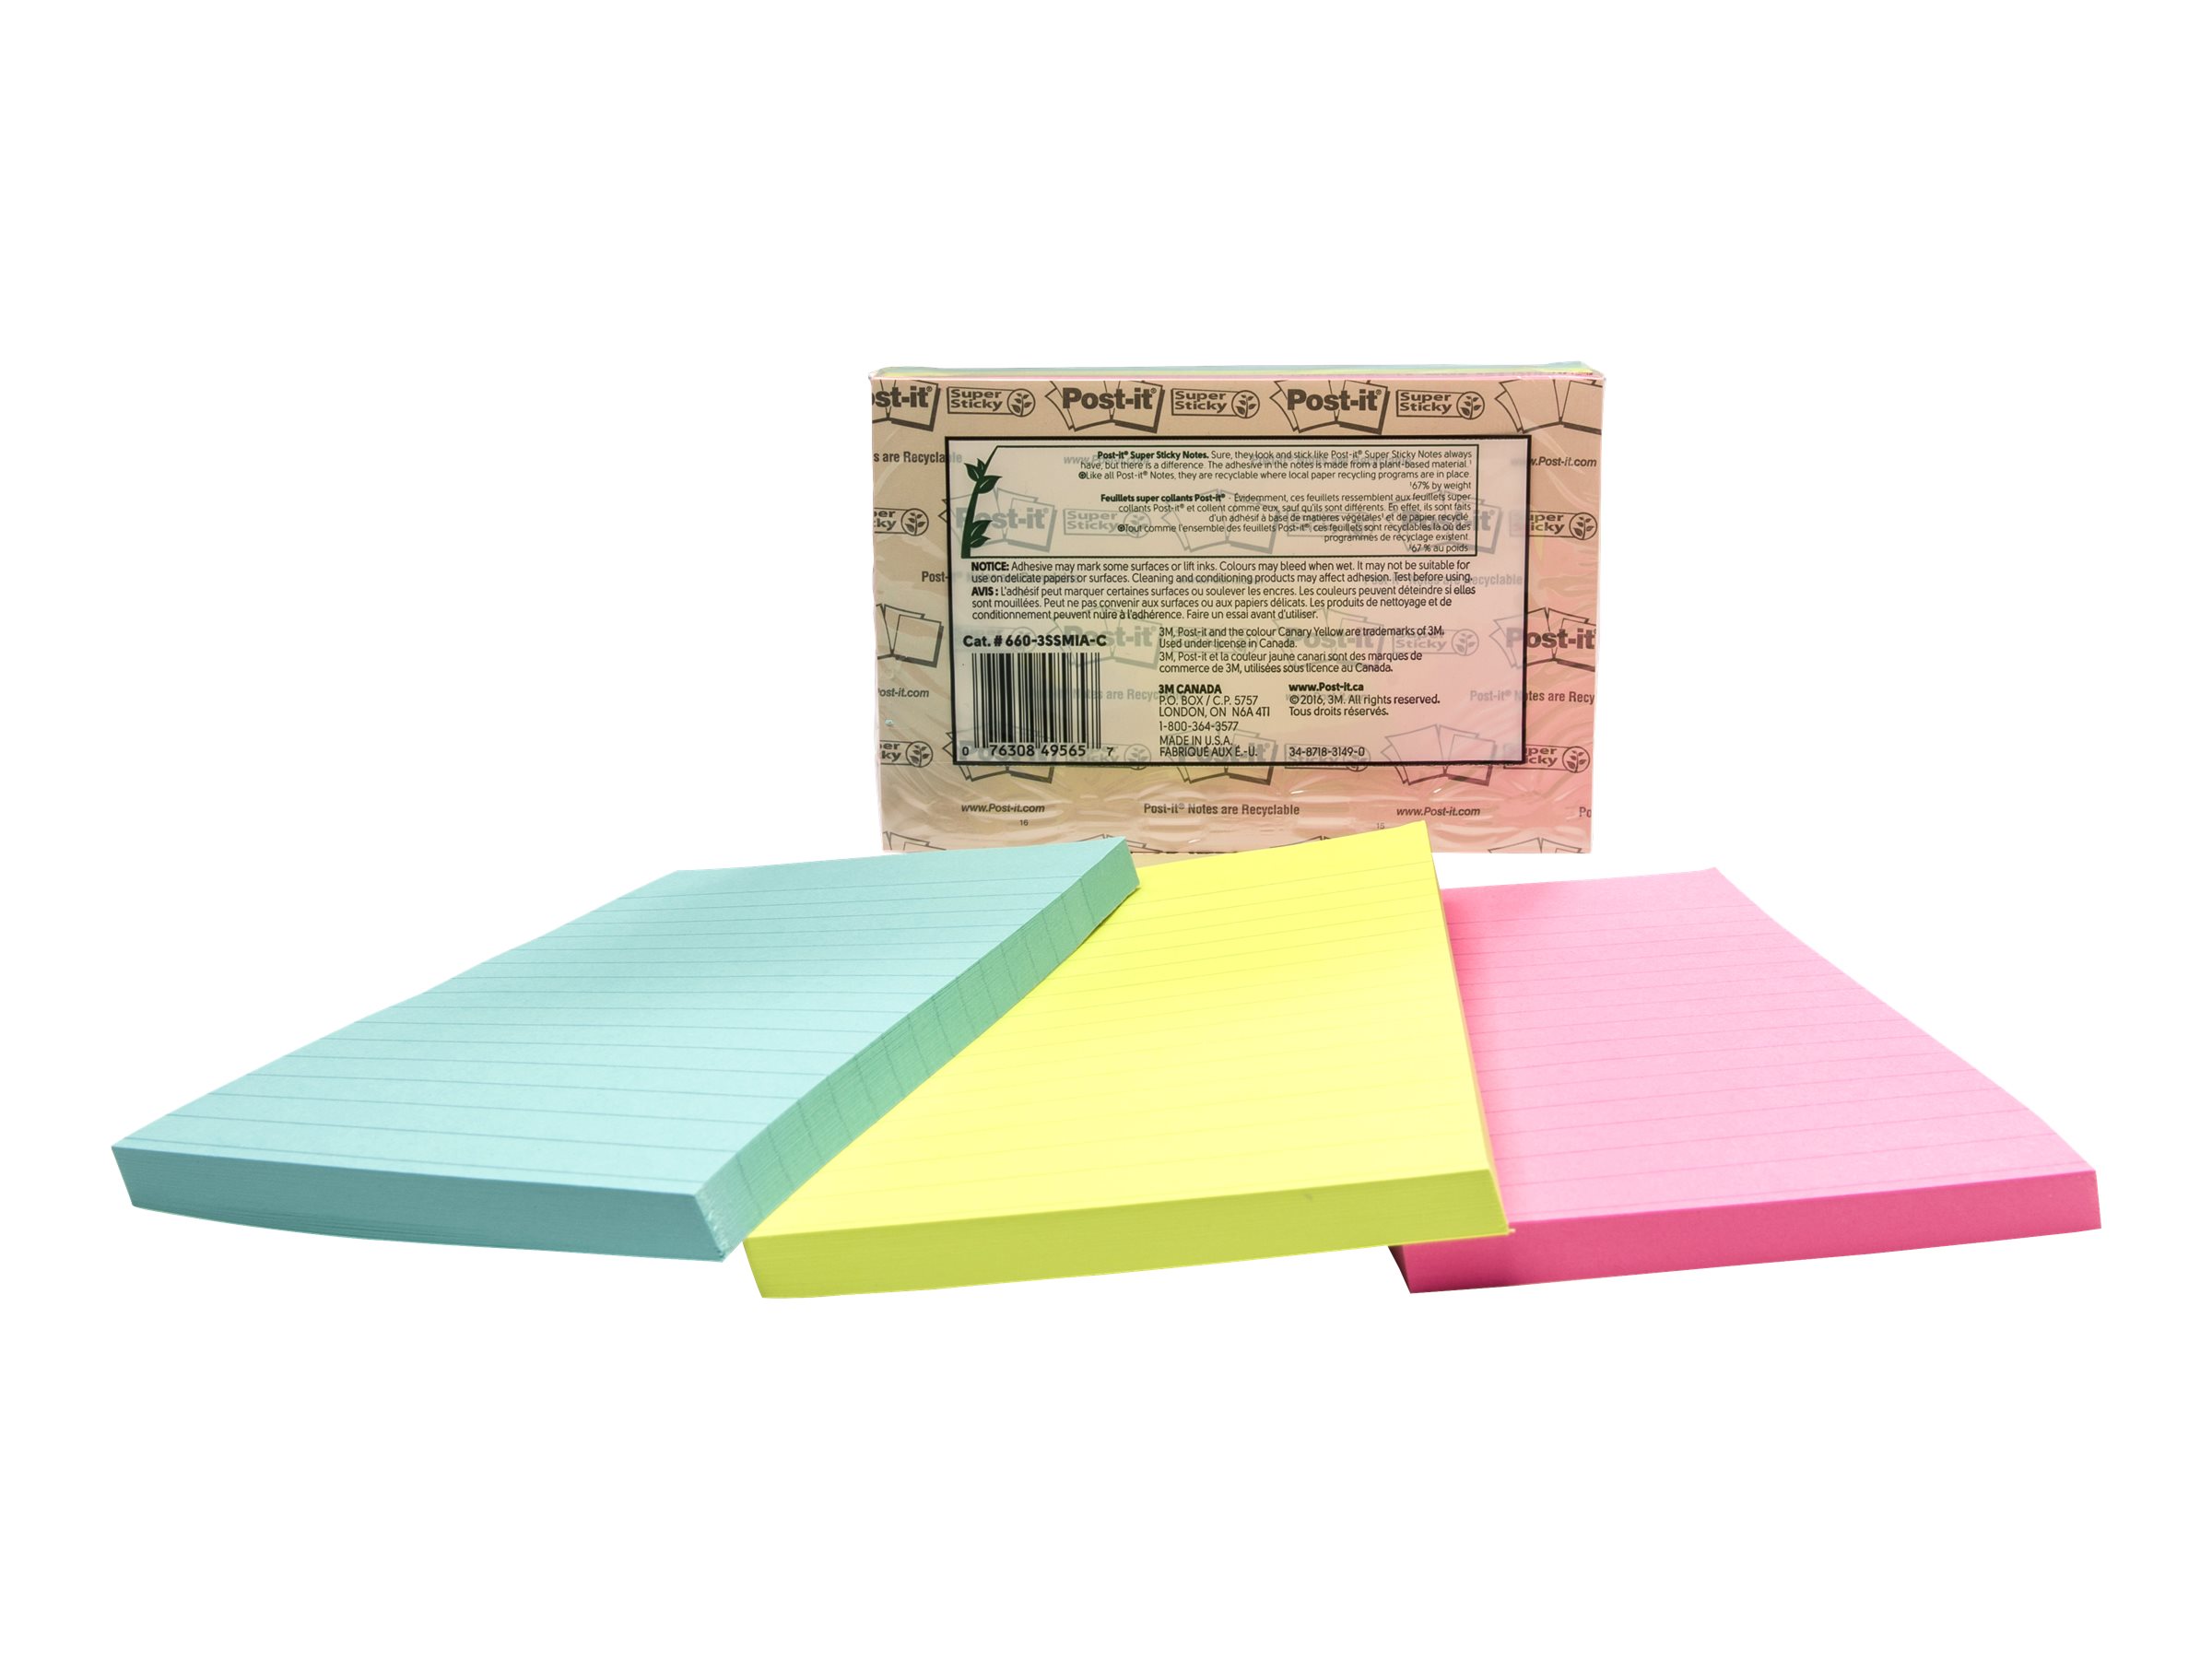 3M Post-it Notes - Miami - 4 in. x 6 in. - 3 x 90 sheets